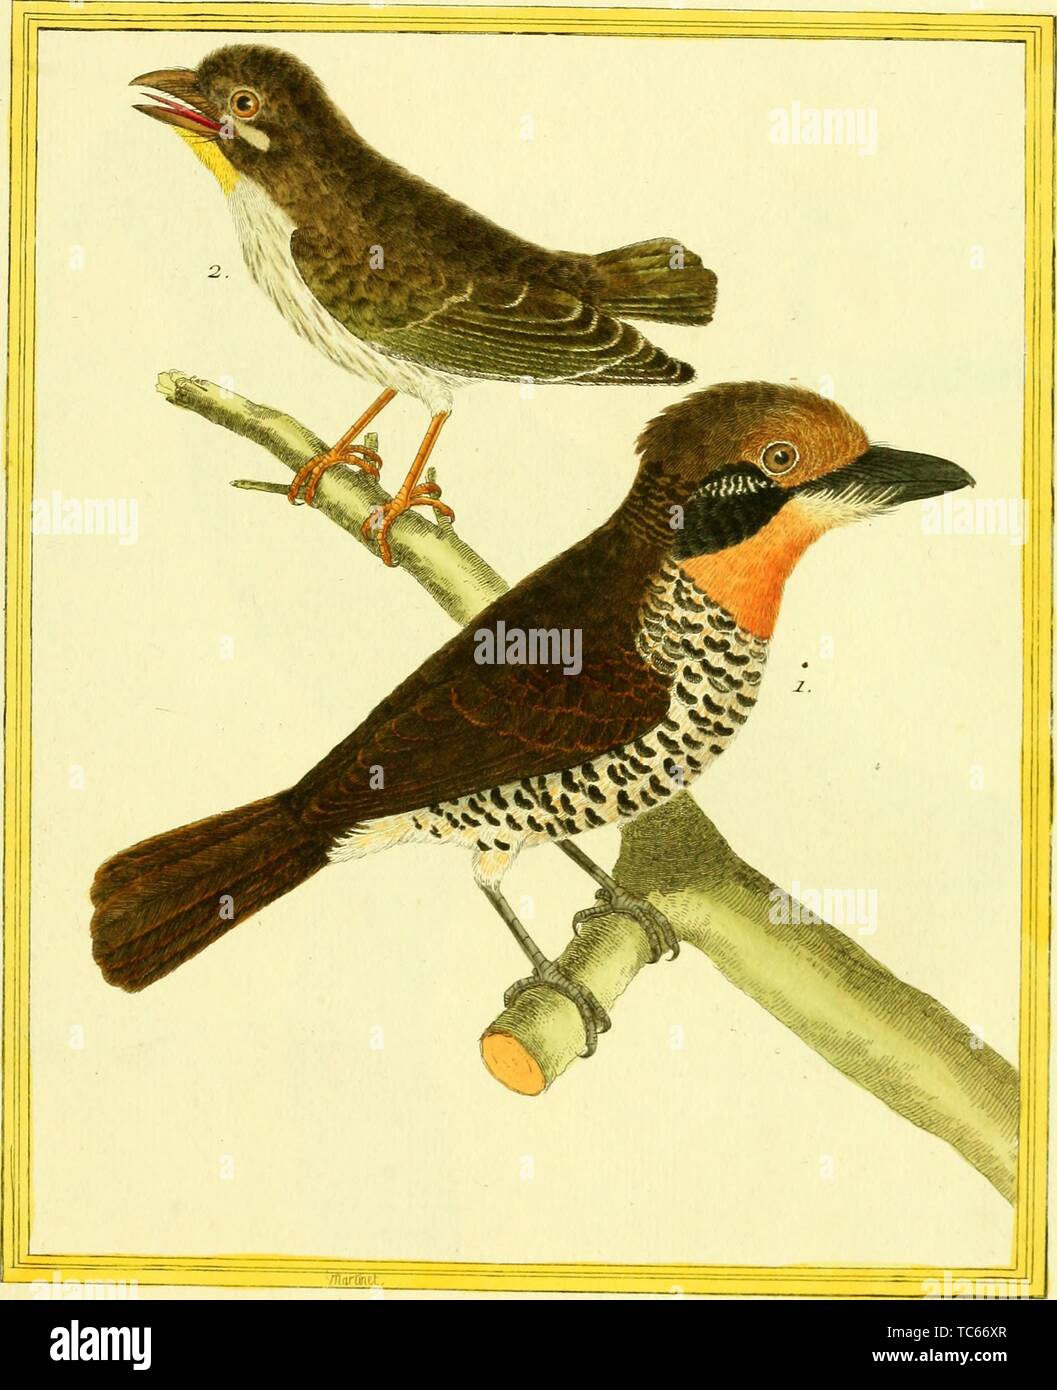 Engraved drawings of the Bearded Barbet (Lybius dubius) and Grey-throated Barbet (Gymnobucco bonapartei), from the book 'Planches enluminees Dhistoire naturelle' by Francois Nicolas, Louis Jean Marie Daubenton, and Edme-Louis Daubenton, 1765. Courtesy Internet Archive. () Stock Photo